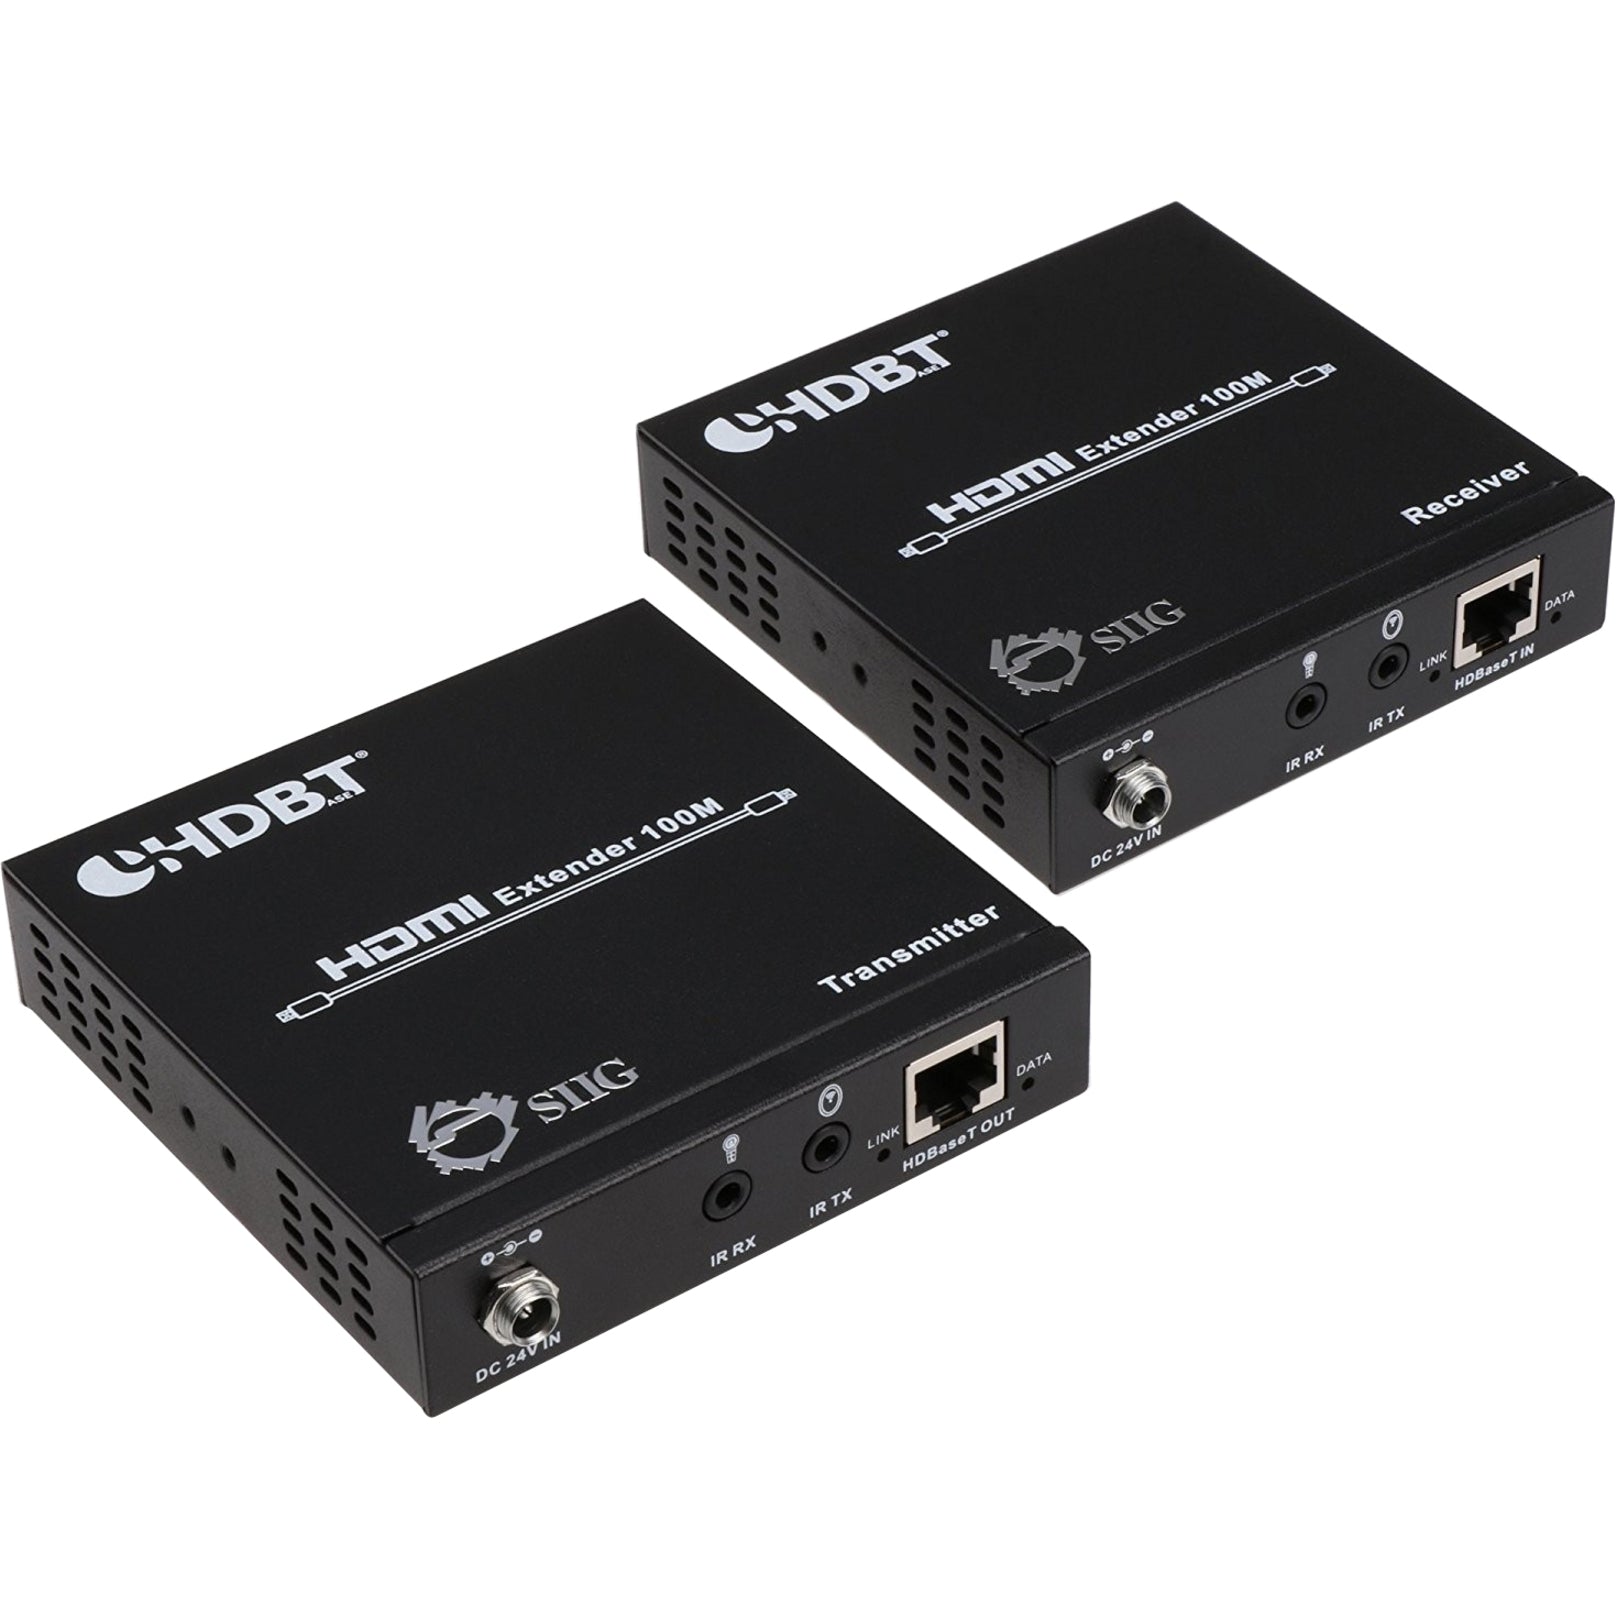 SIIG CE-H22F14-S1 HDMI HDBaseT Extender with IR/RS-232 Control and POE - 100m, Extends HDMI Signals up to 100 Meters